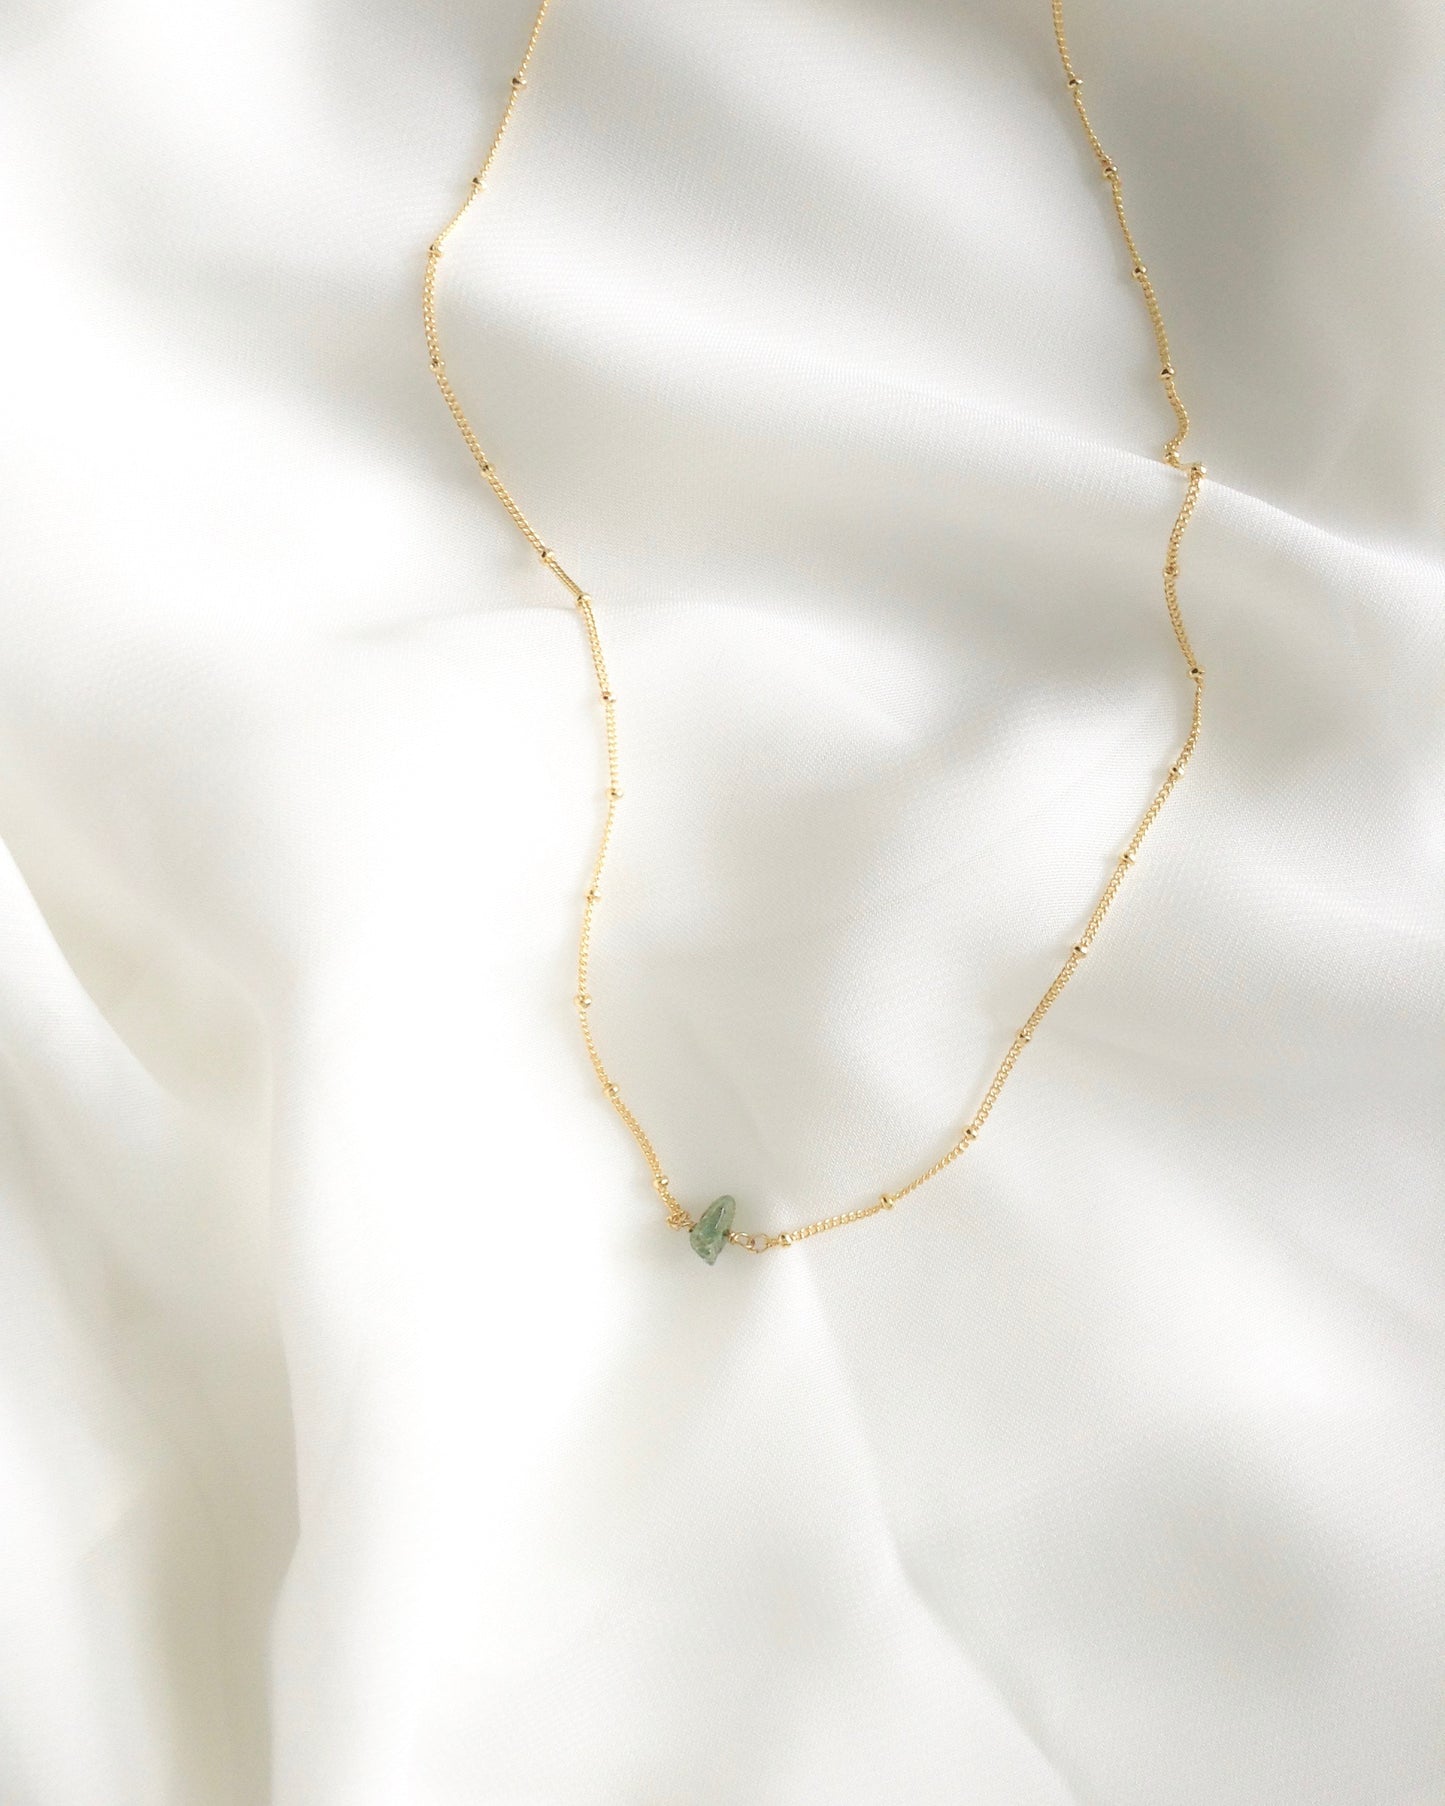 Dainty Raw Emerald Necklace in Gold Filled or Sterling Silver | Tiny Raw Gemstone Necklace | IB Jewelry